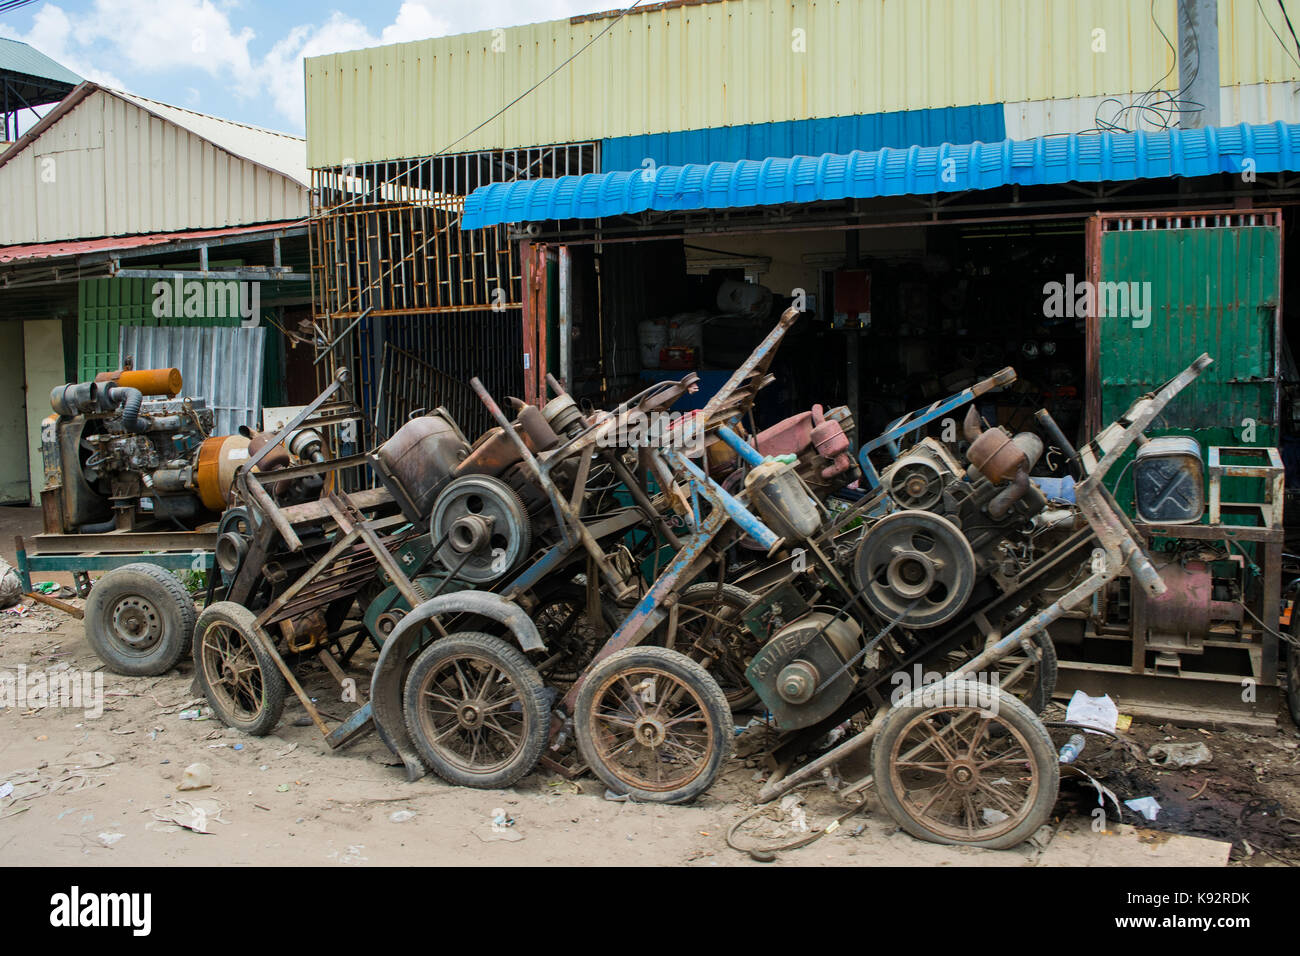 A mechanic garage and workshop, with out of order engines waiting for repairs and maintenance outside. Phnom Penh Cambodia, South East Asia, Indochina Stock Photo